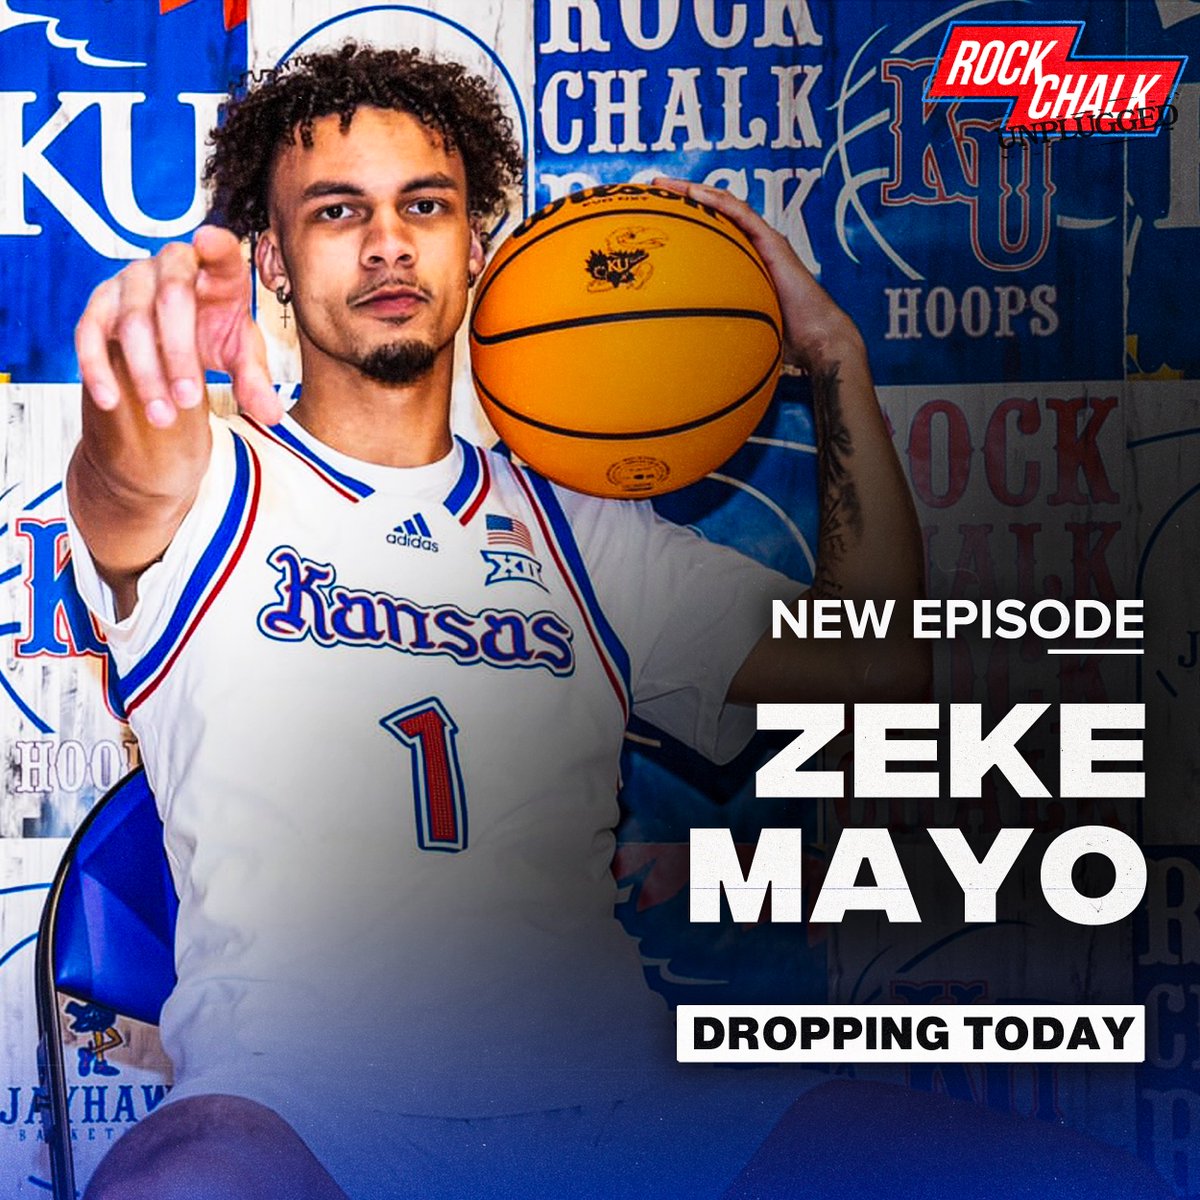 TODAY 🚨 New episode of Rock Chalk Unplugged drops with @zekexmayo 👀